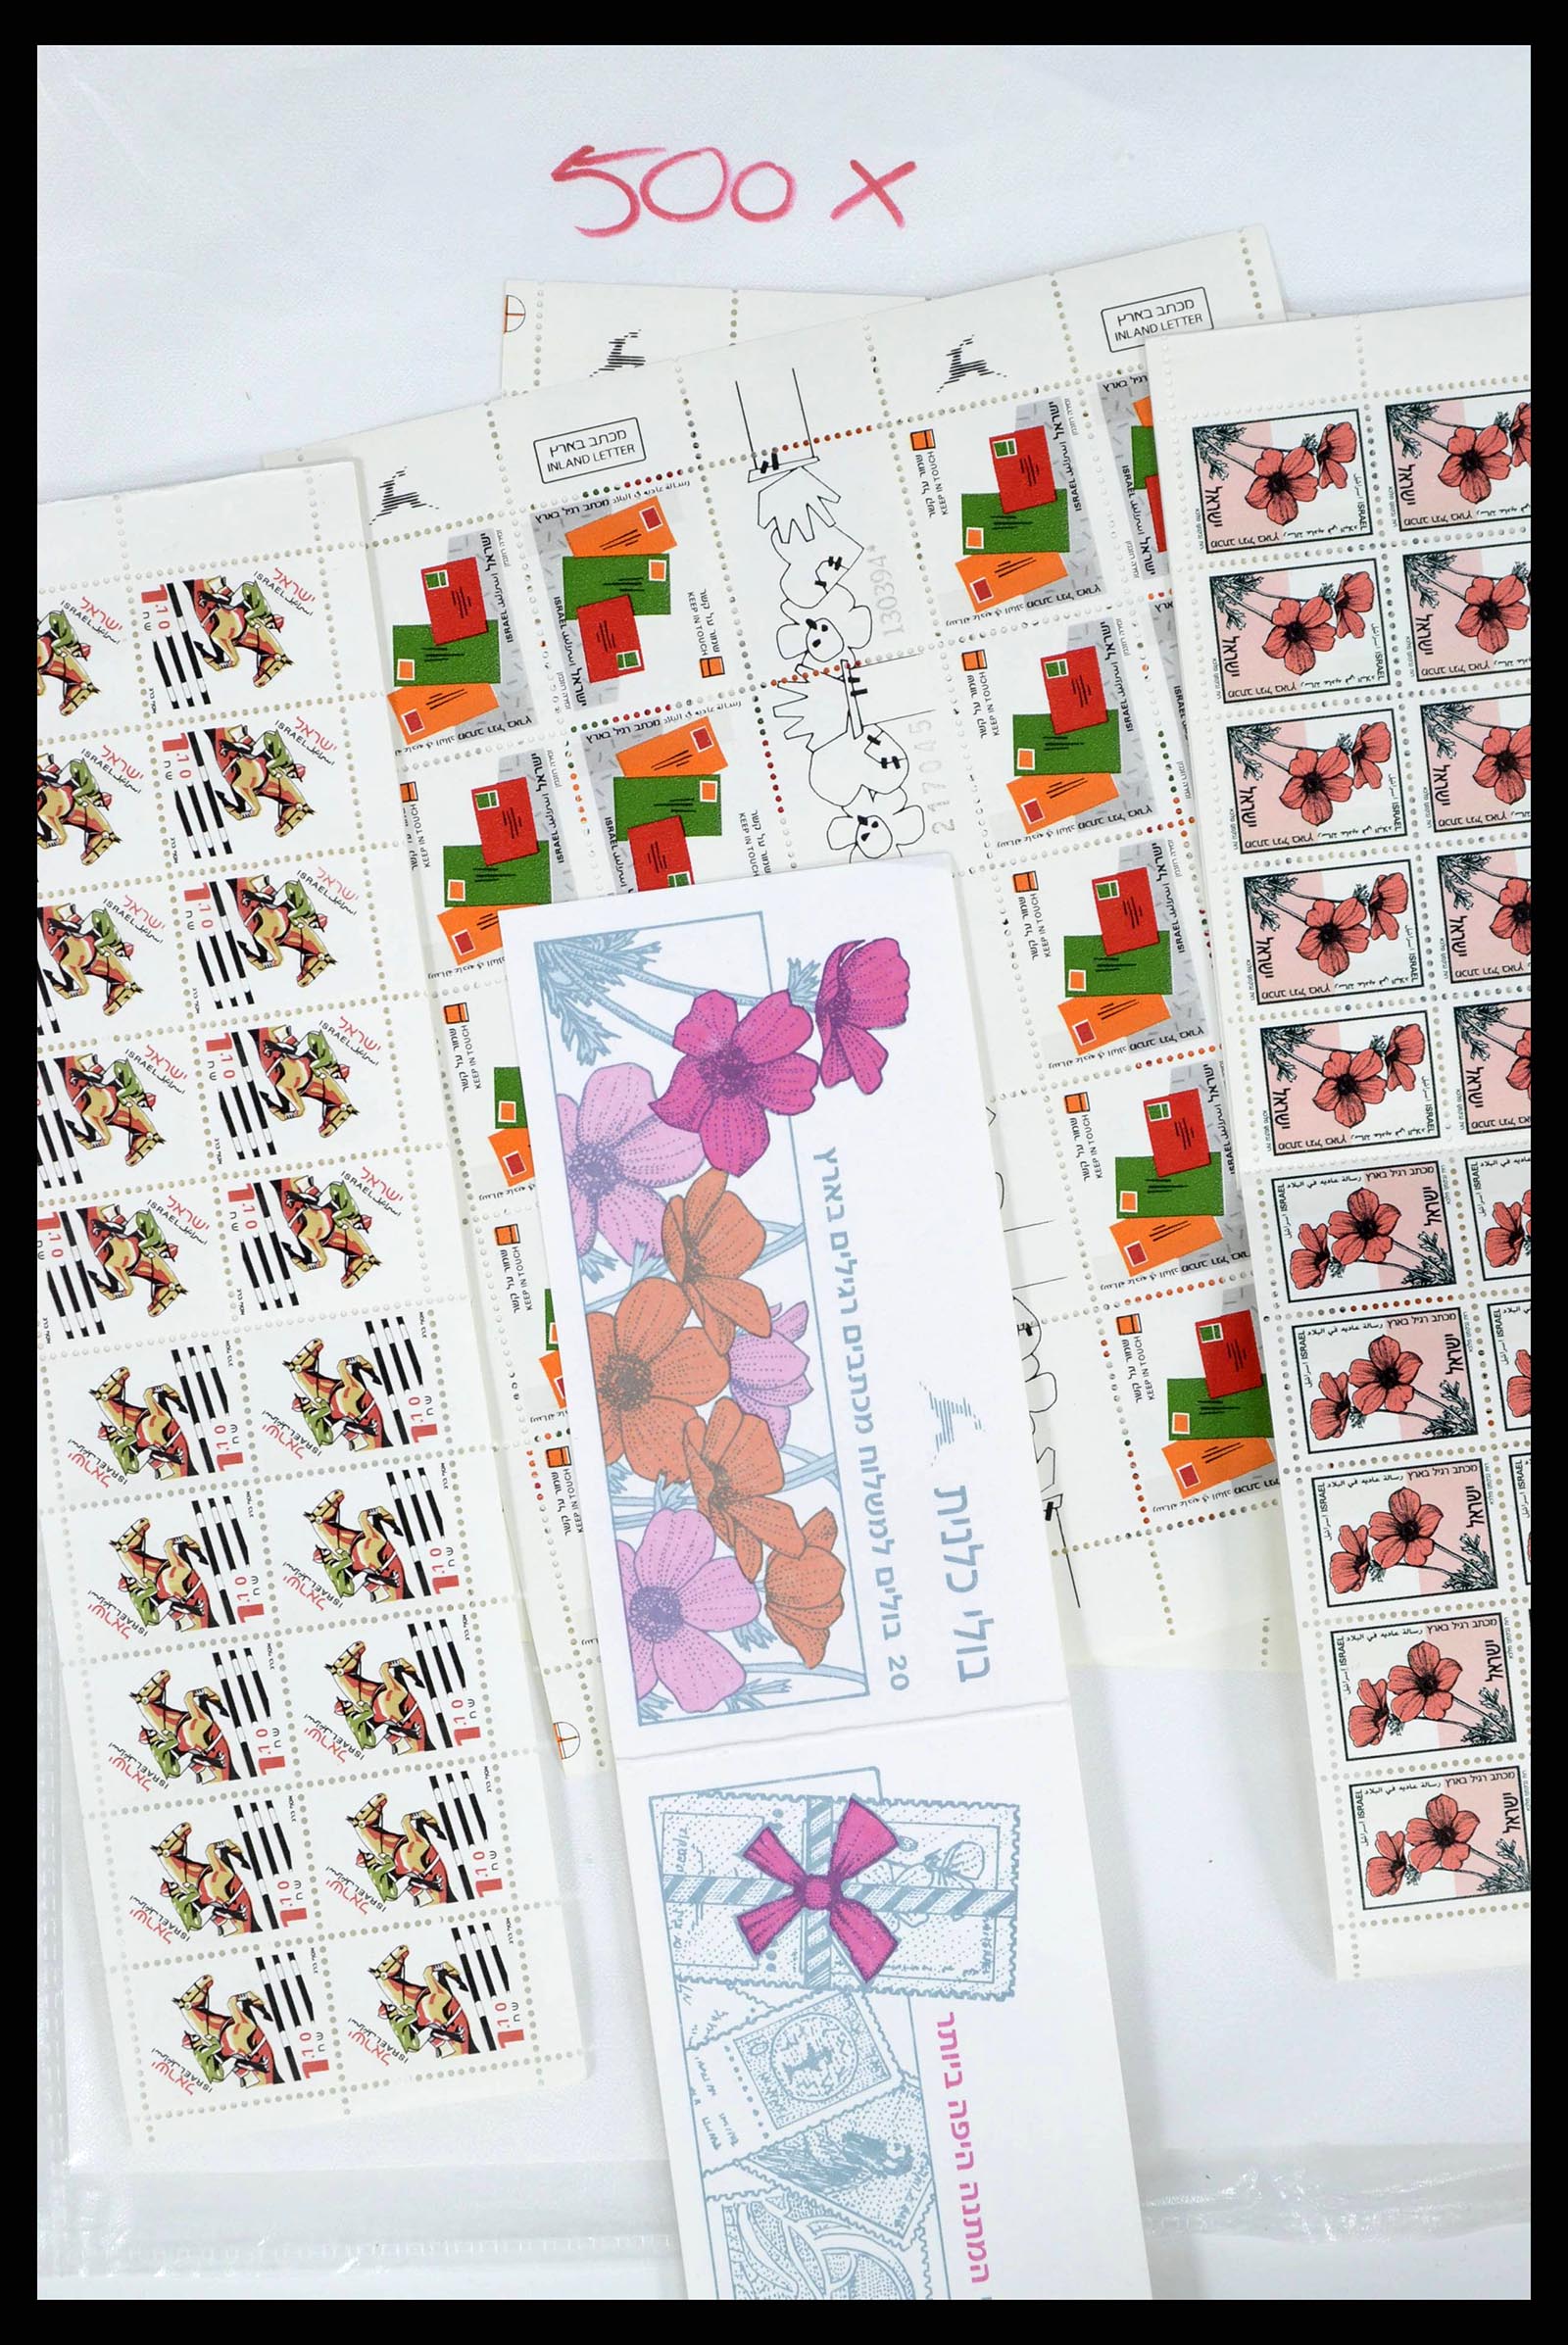 38303 0004 - Stamp collection 38303 Israel face value.